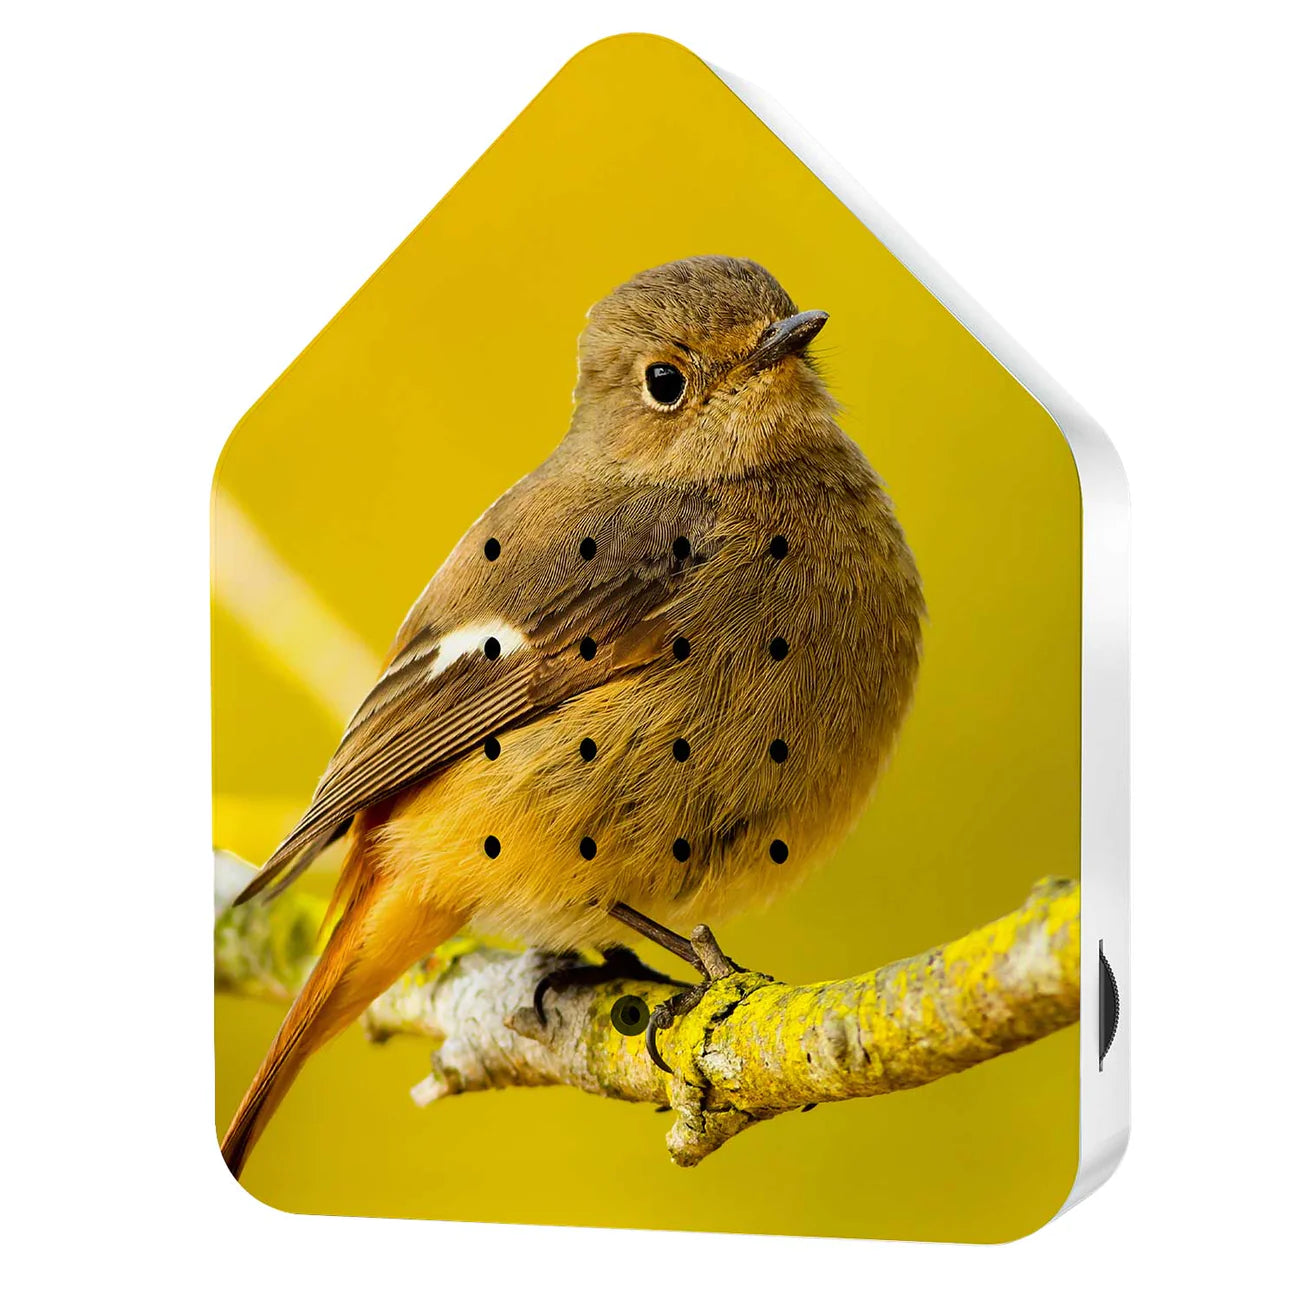 Nyhed! Birdy Box Limited edition - Daurian Redstart